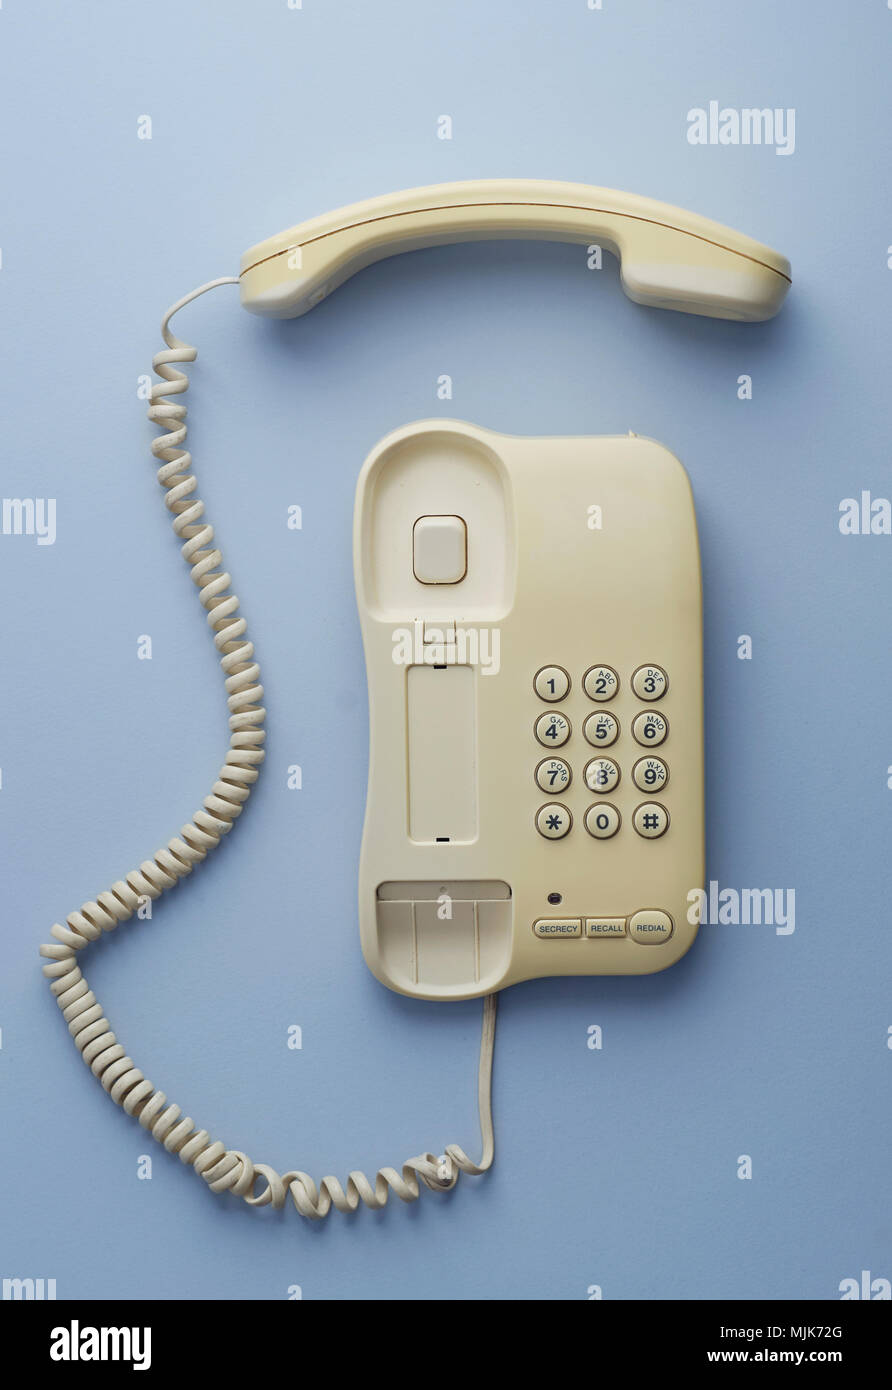 Vintage home telephone over blue background, above view. This image is part of a larger series. Stock Photo